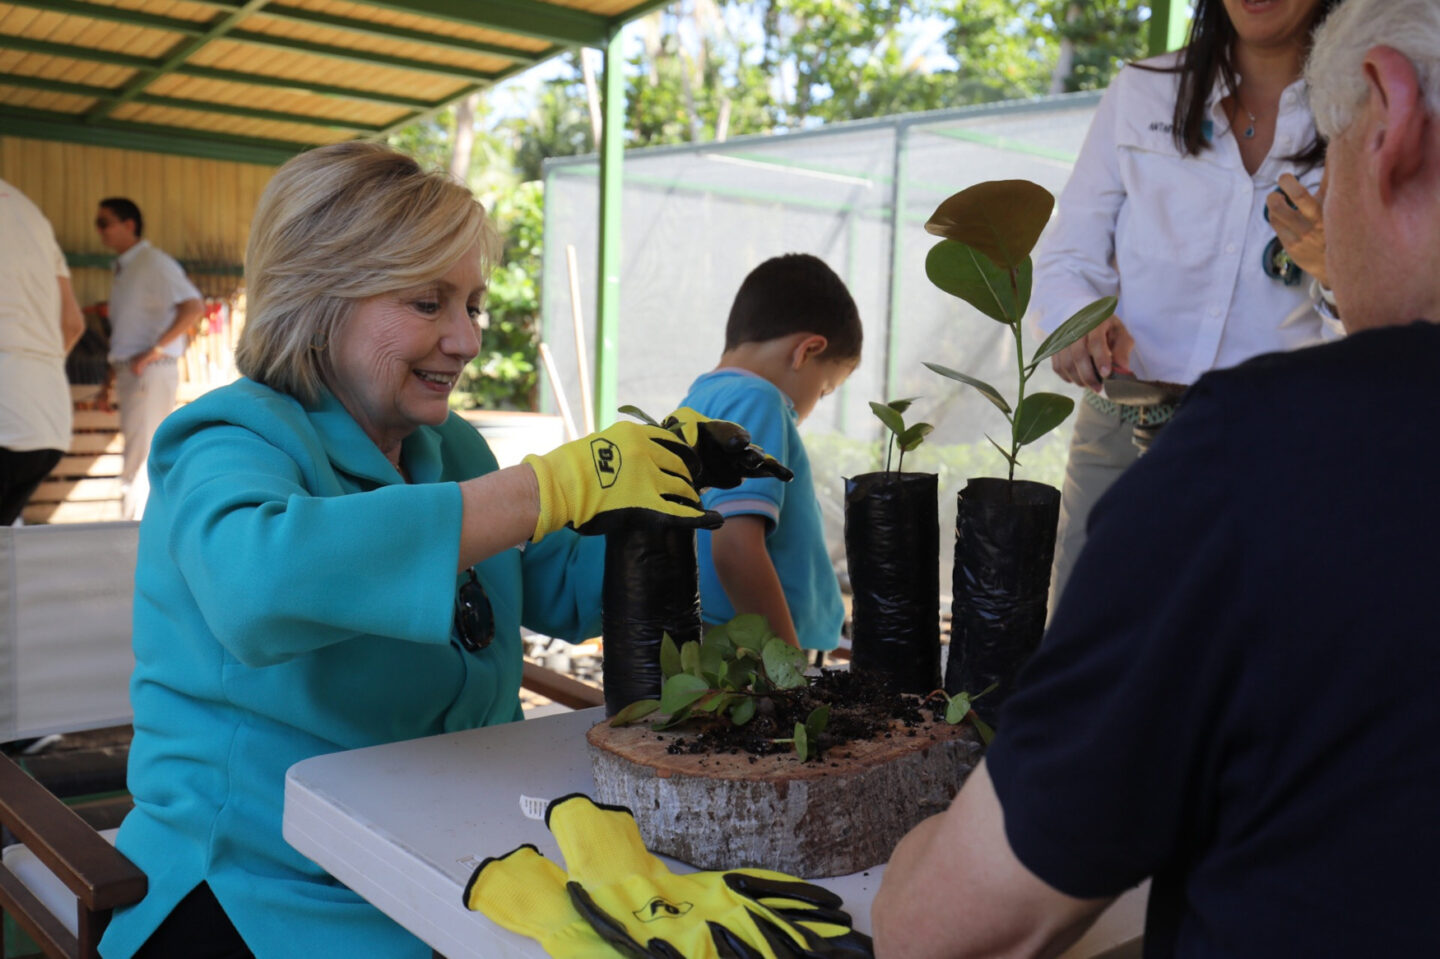 Secretary Clinton plants saplings during a site visit to a tree nursery in Puerto Rico